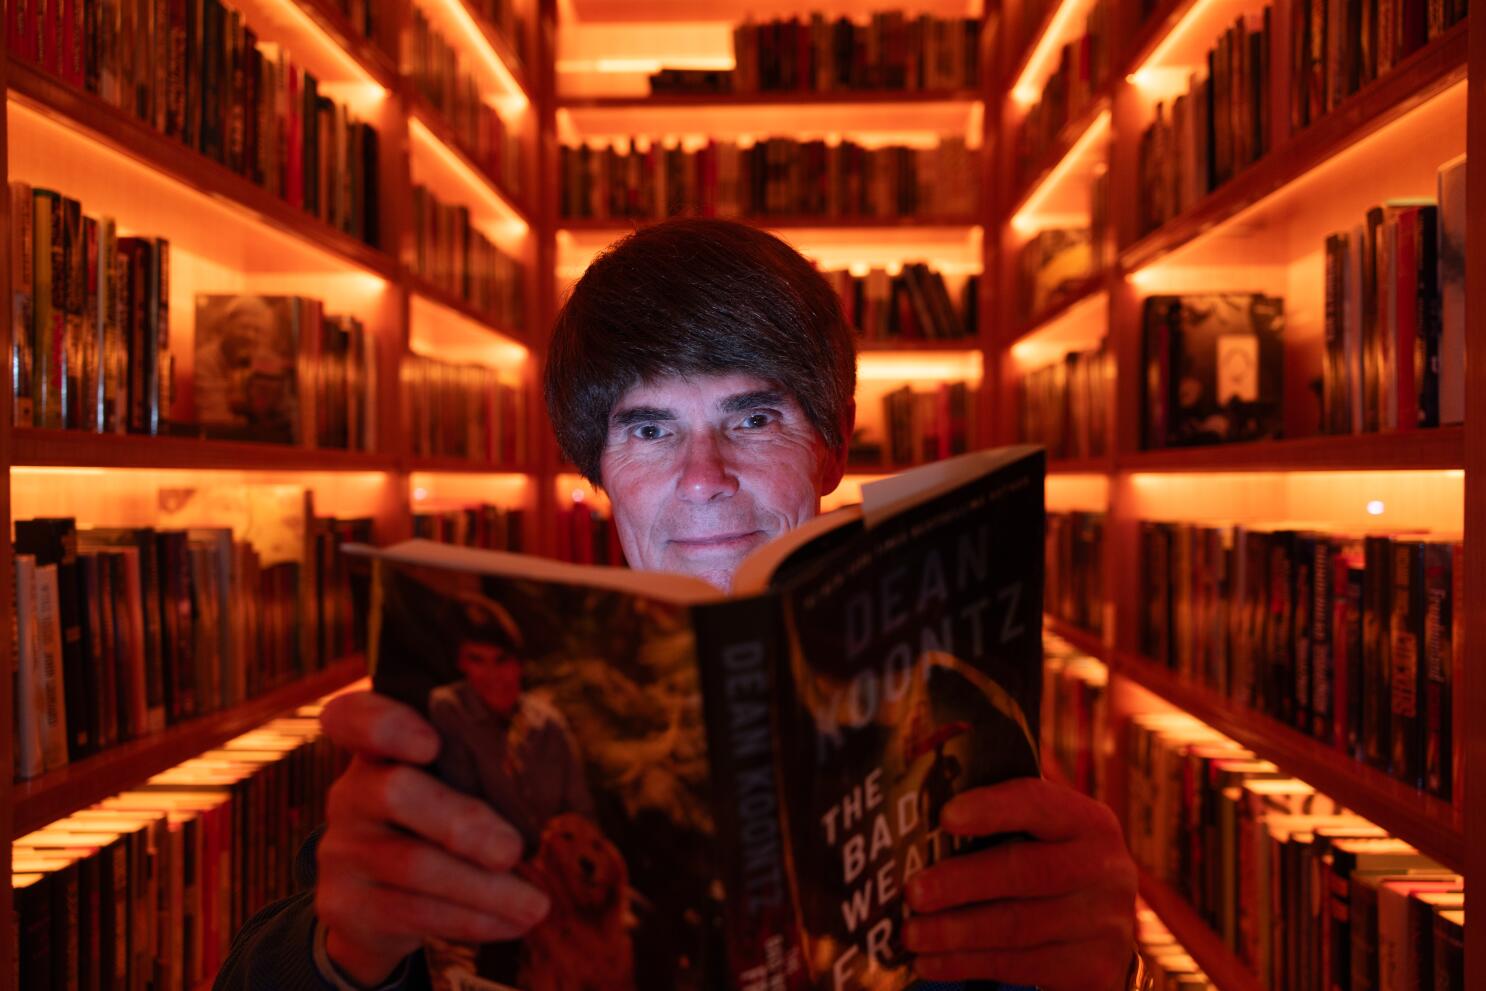 He started his career in science fiction, then focused on horror: Who is Dean Koontz?